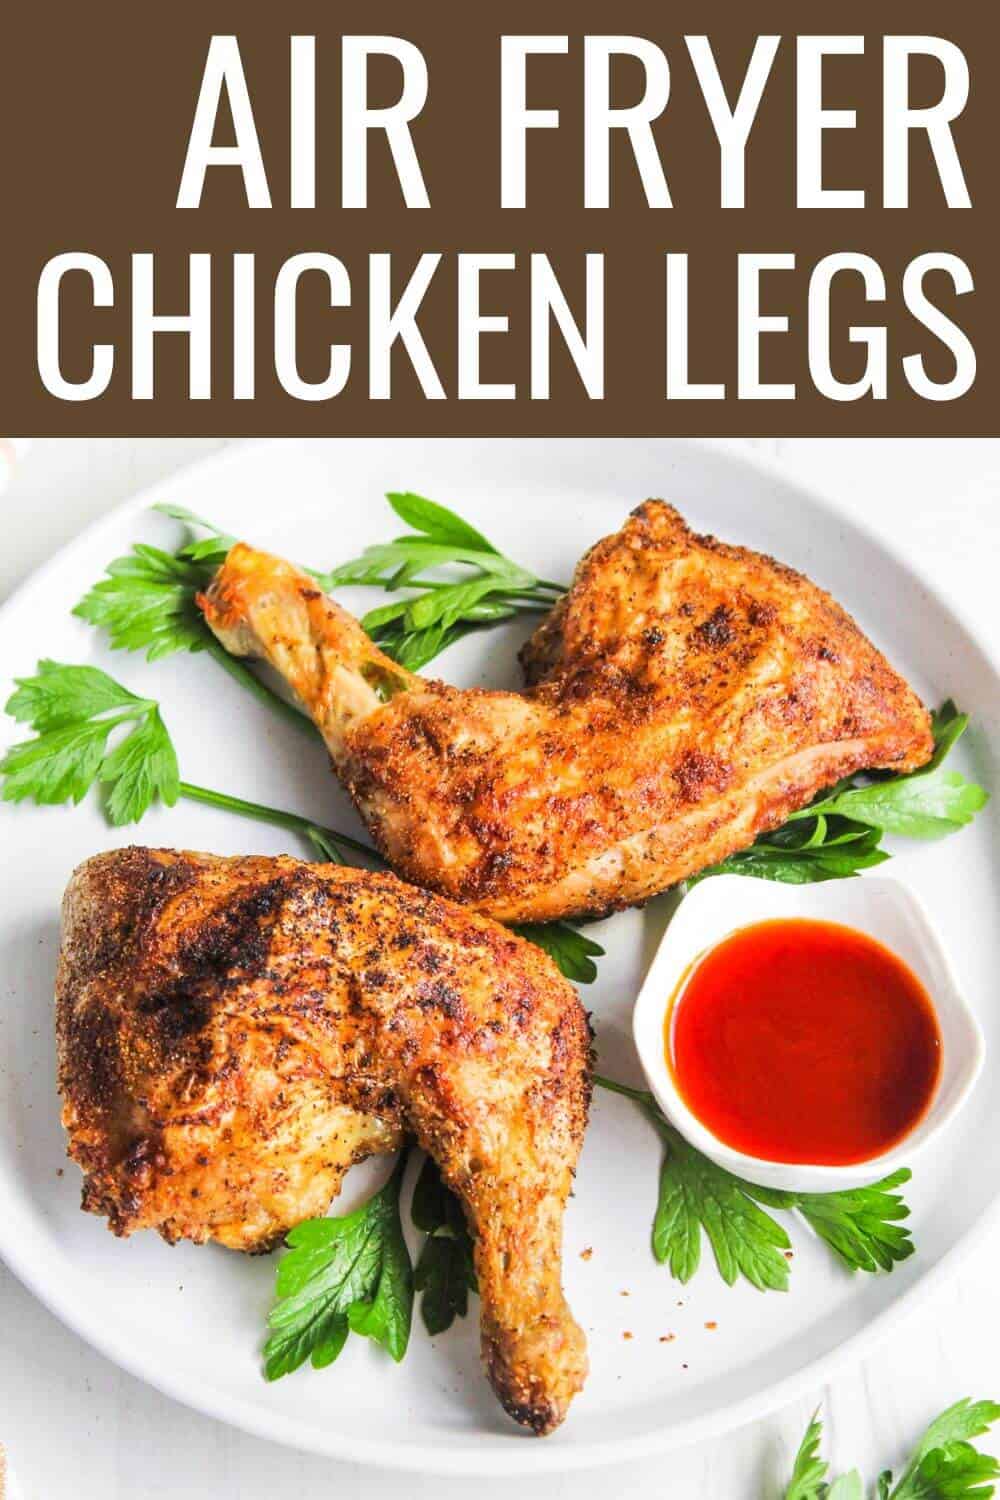 Air fryer chicken legs with recipe title text overlay.